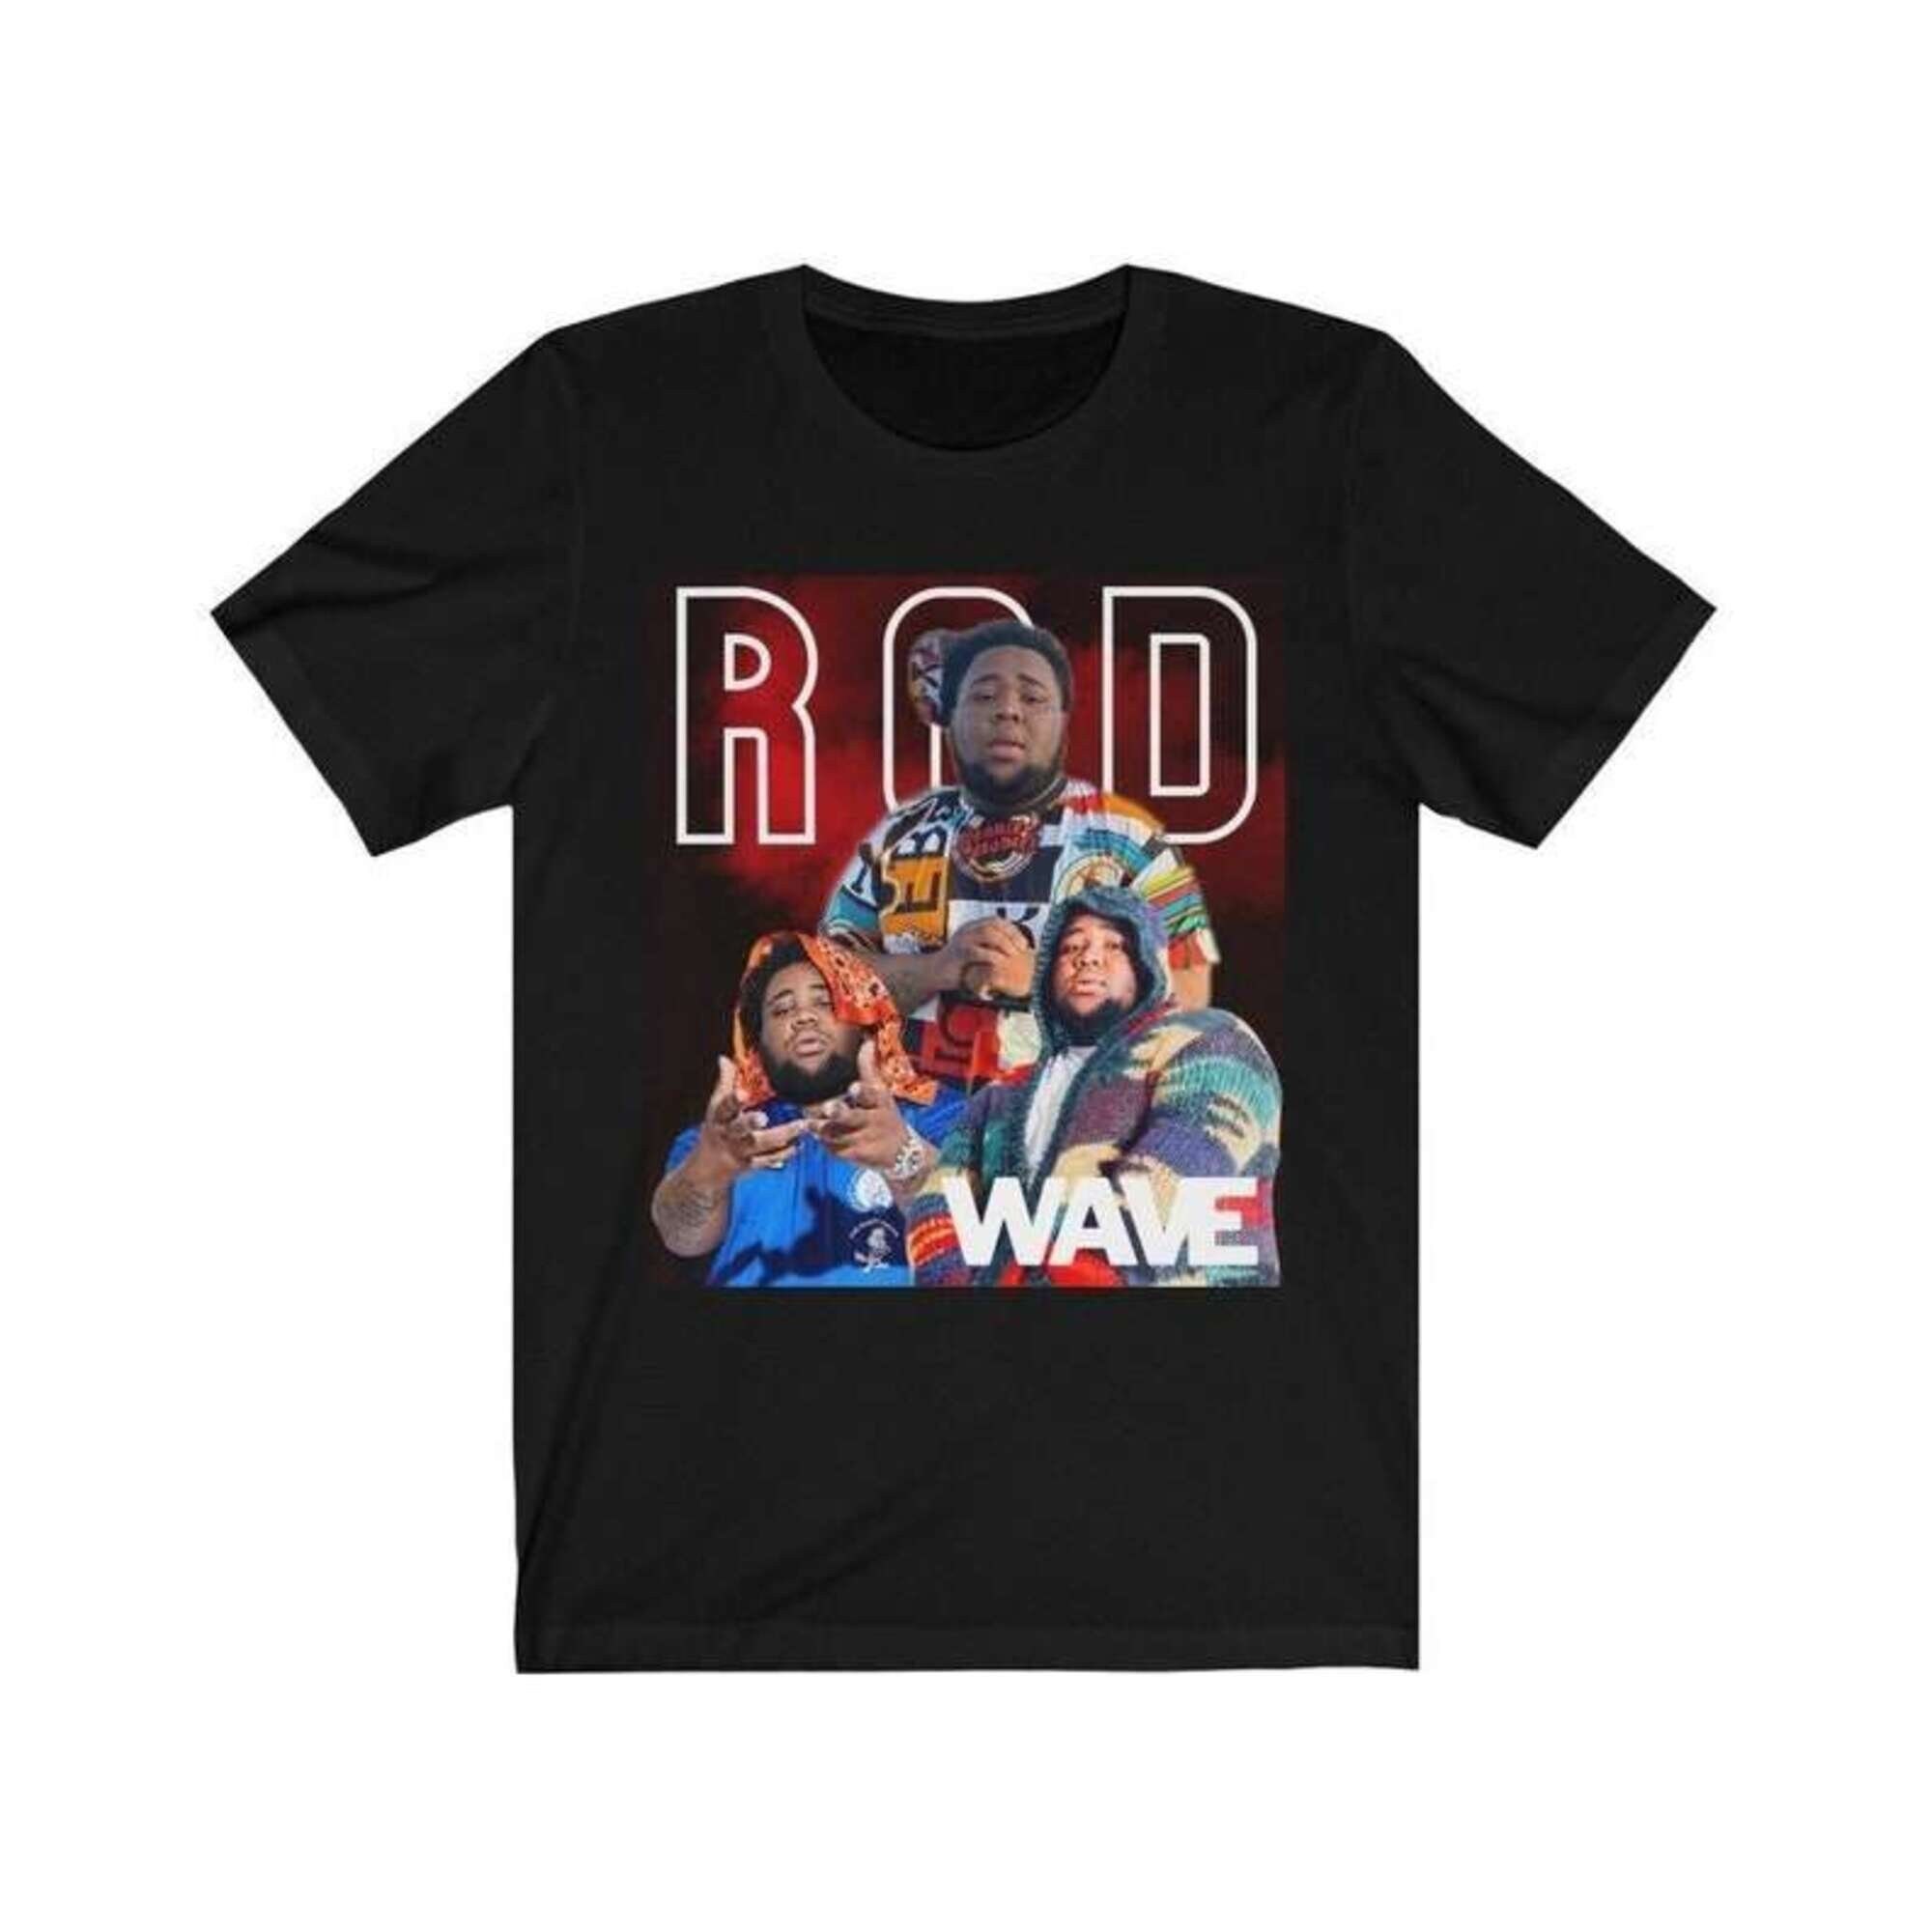 Rod Wave Face Graphic Tee DZT